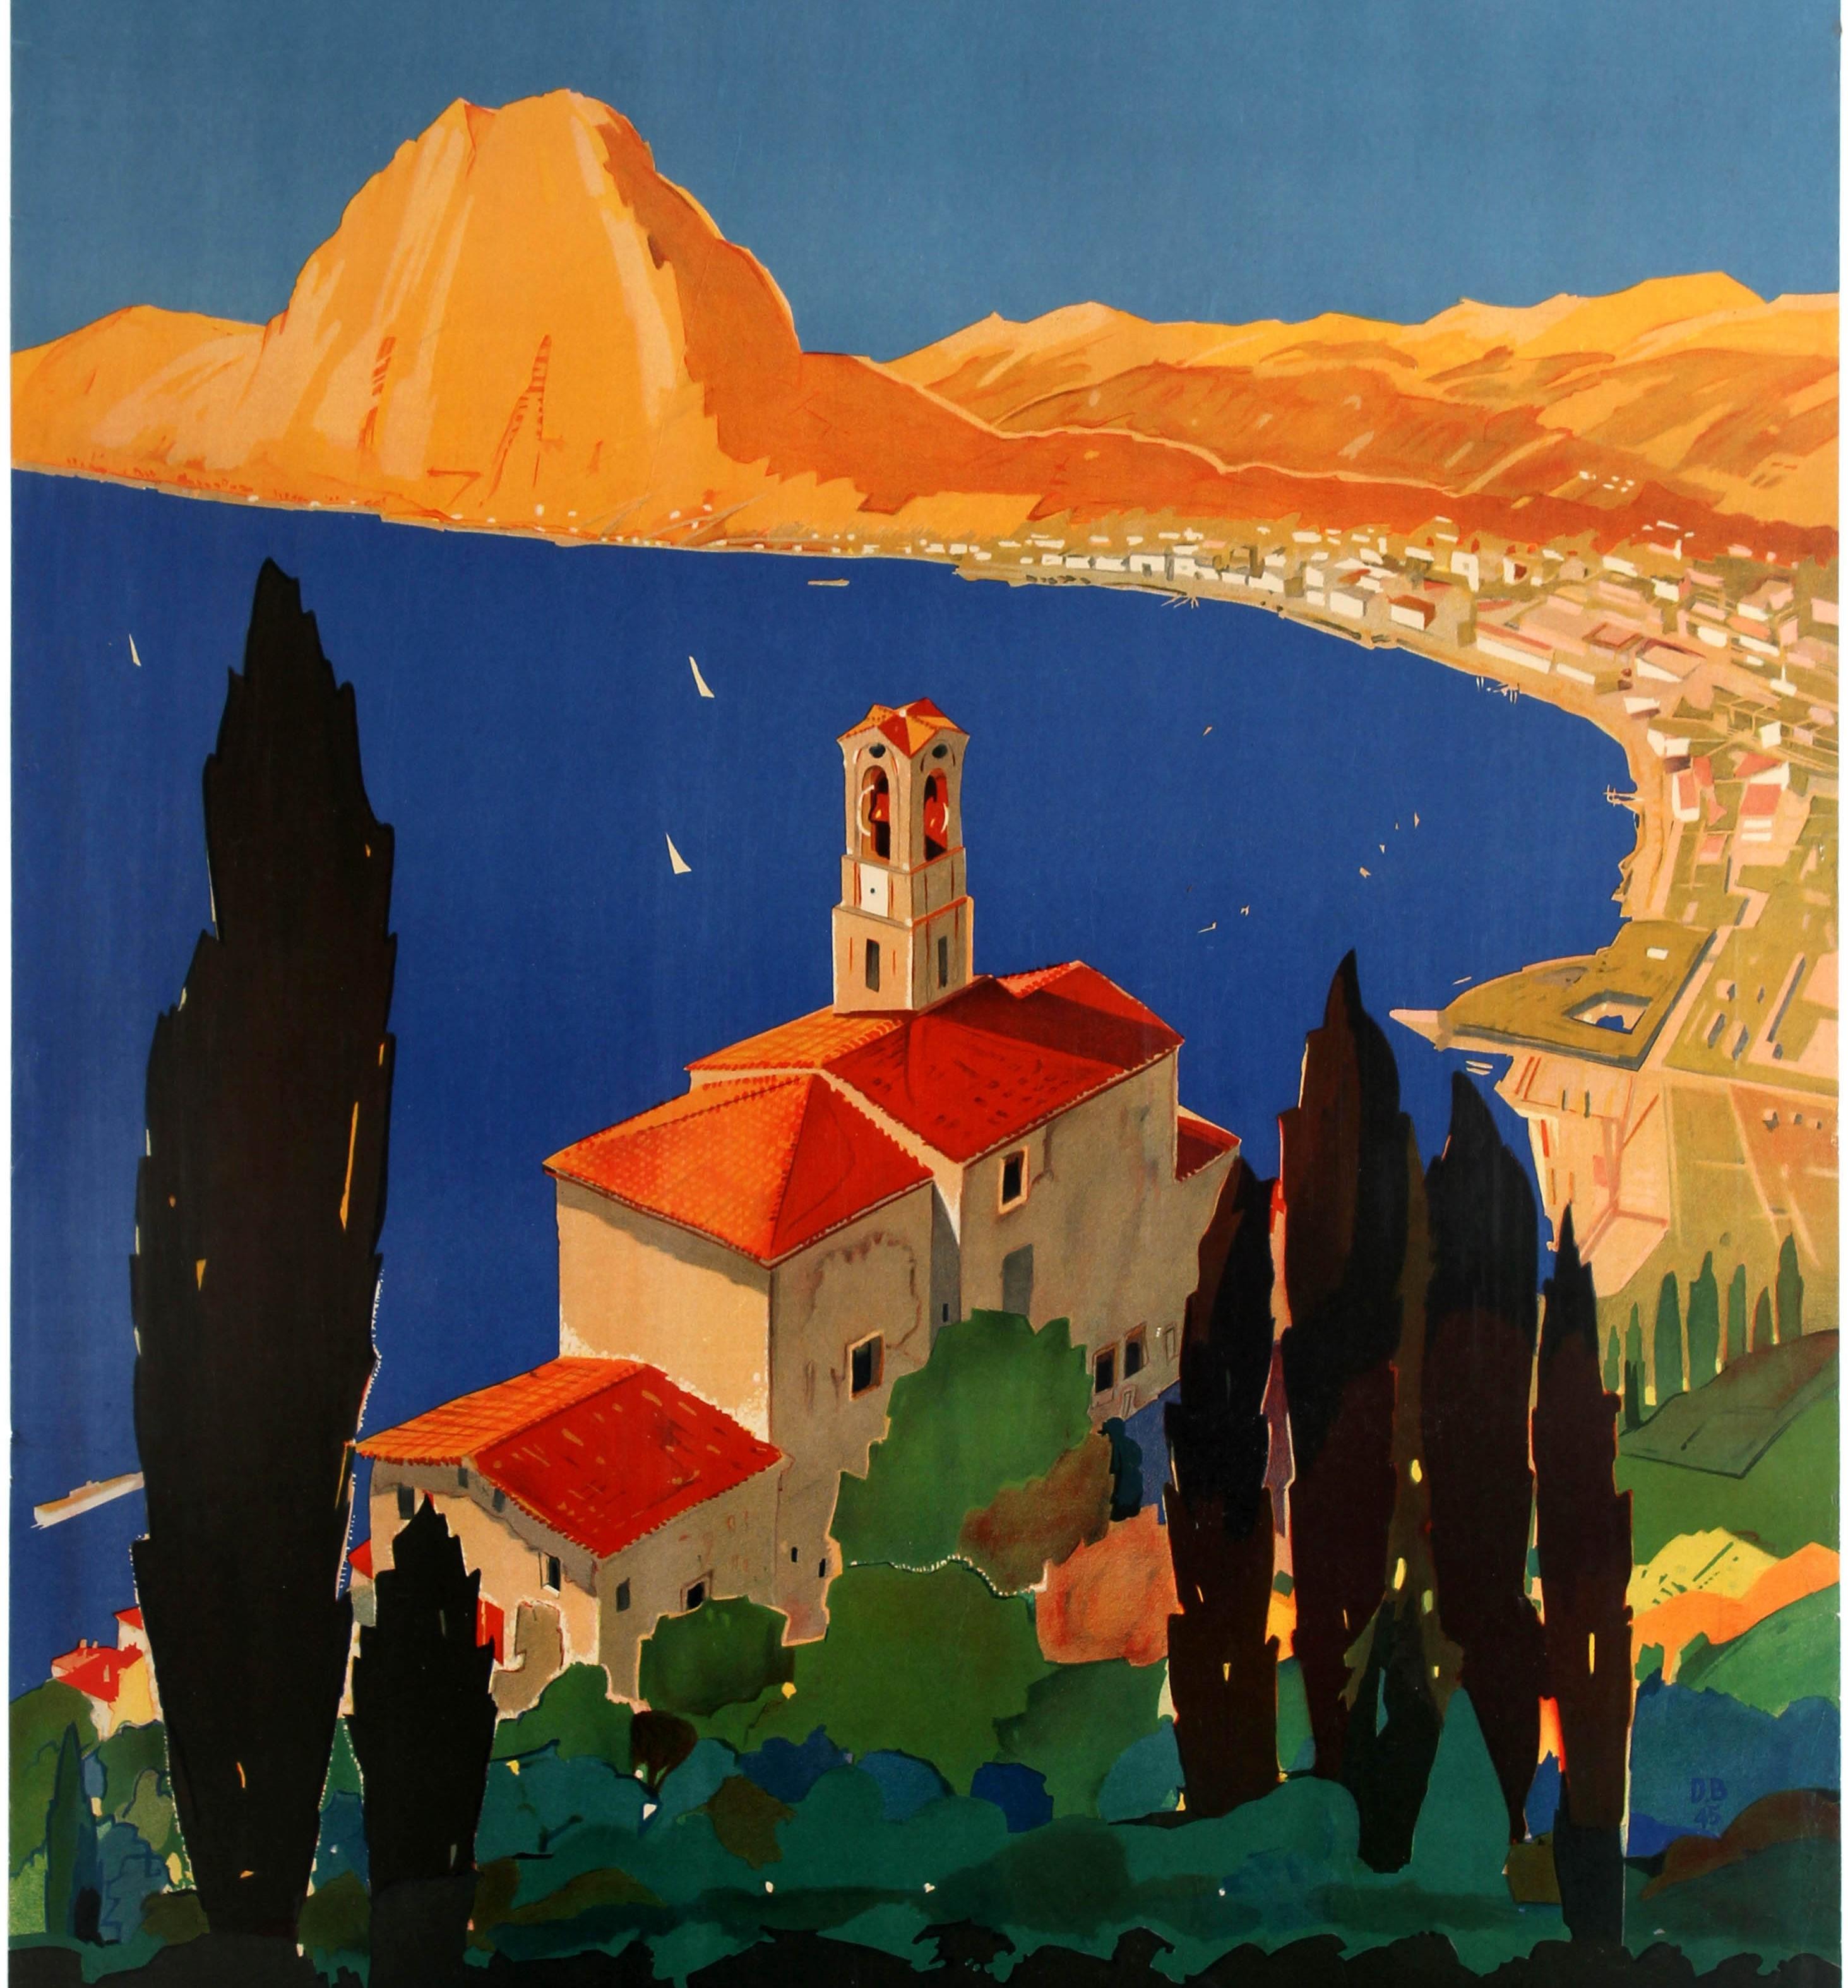 Original vintage travel poster promoting the city of Lugano located on Lake Lugano near the border with Italy in southern Switzerland. Fantastic artwork by Daniele Buzzi (1890-1974) featuring a scenic view of the lake with cypress trees and a church